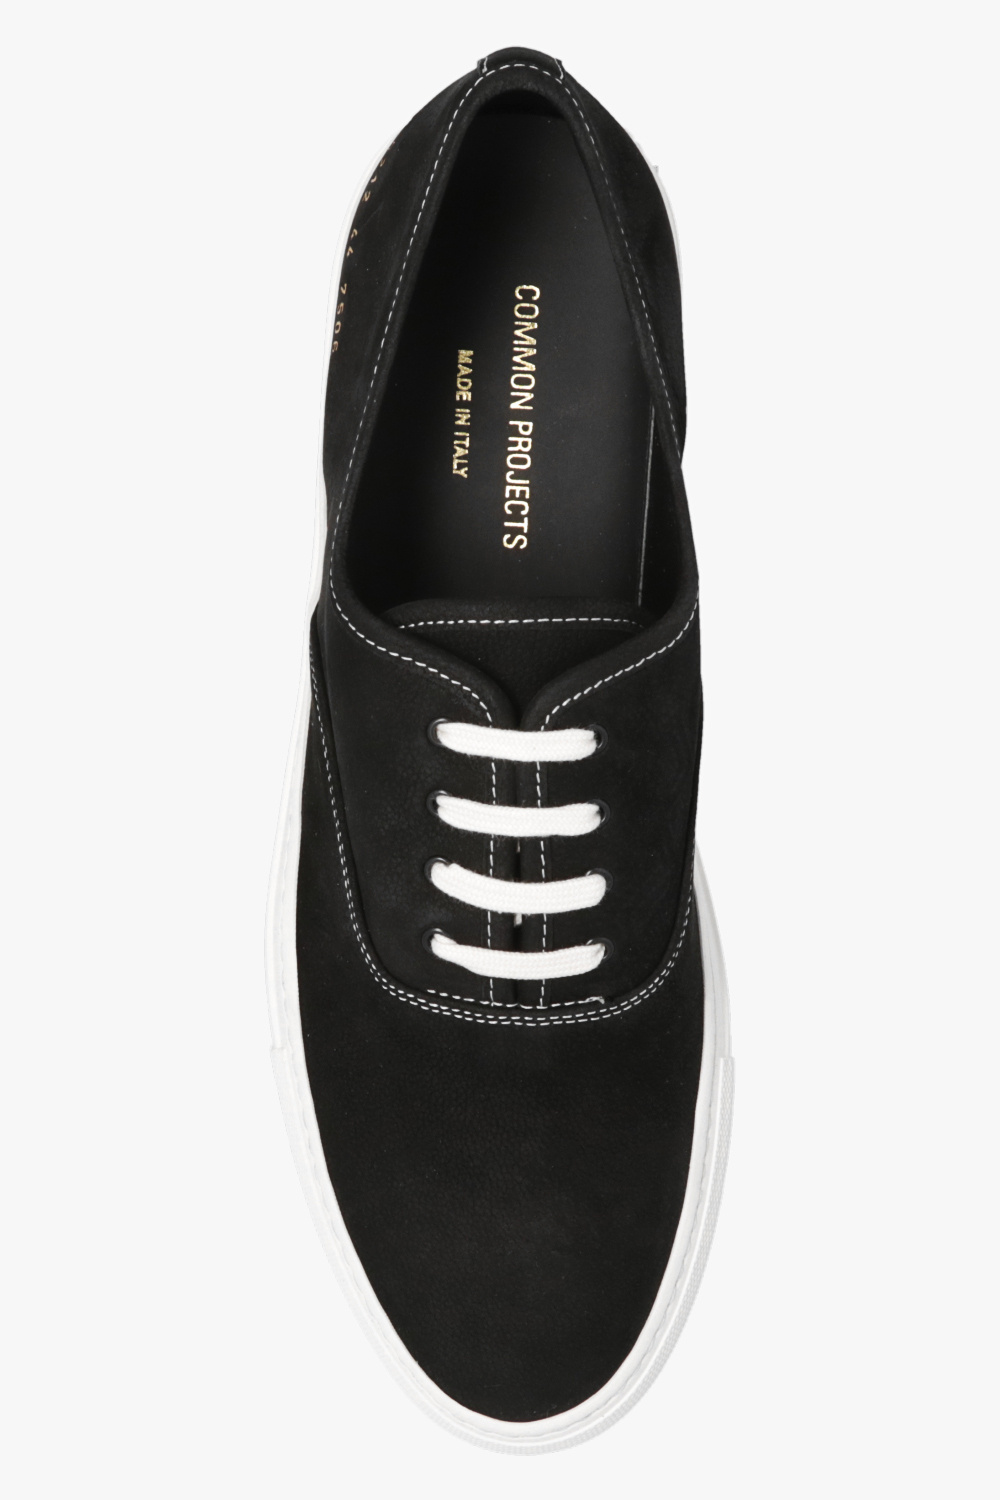 Common Projects 'Four Hole' sneakers | Men's Shoes | Vitkac